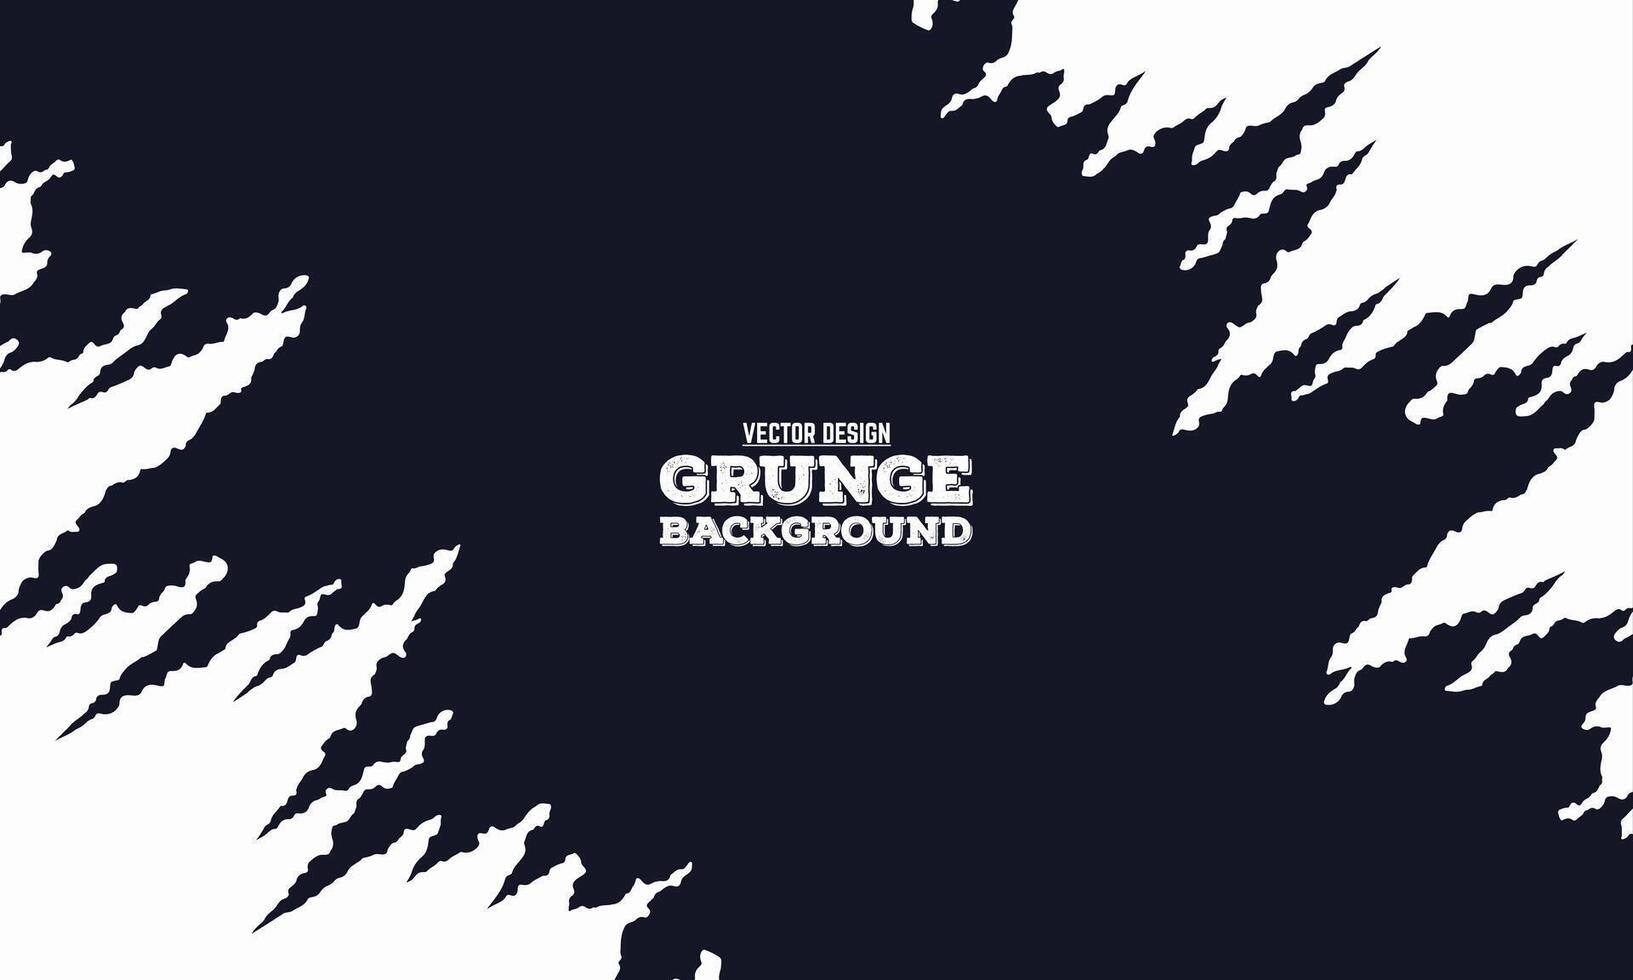 grunge background with black and white lines vector